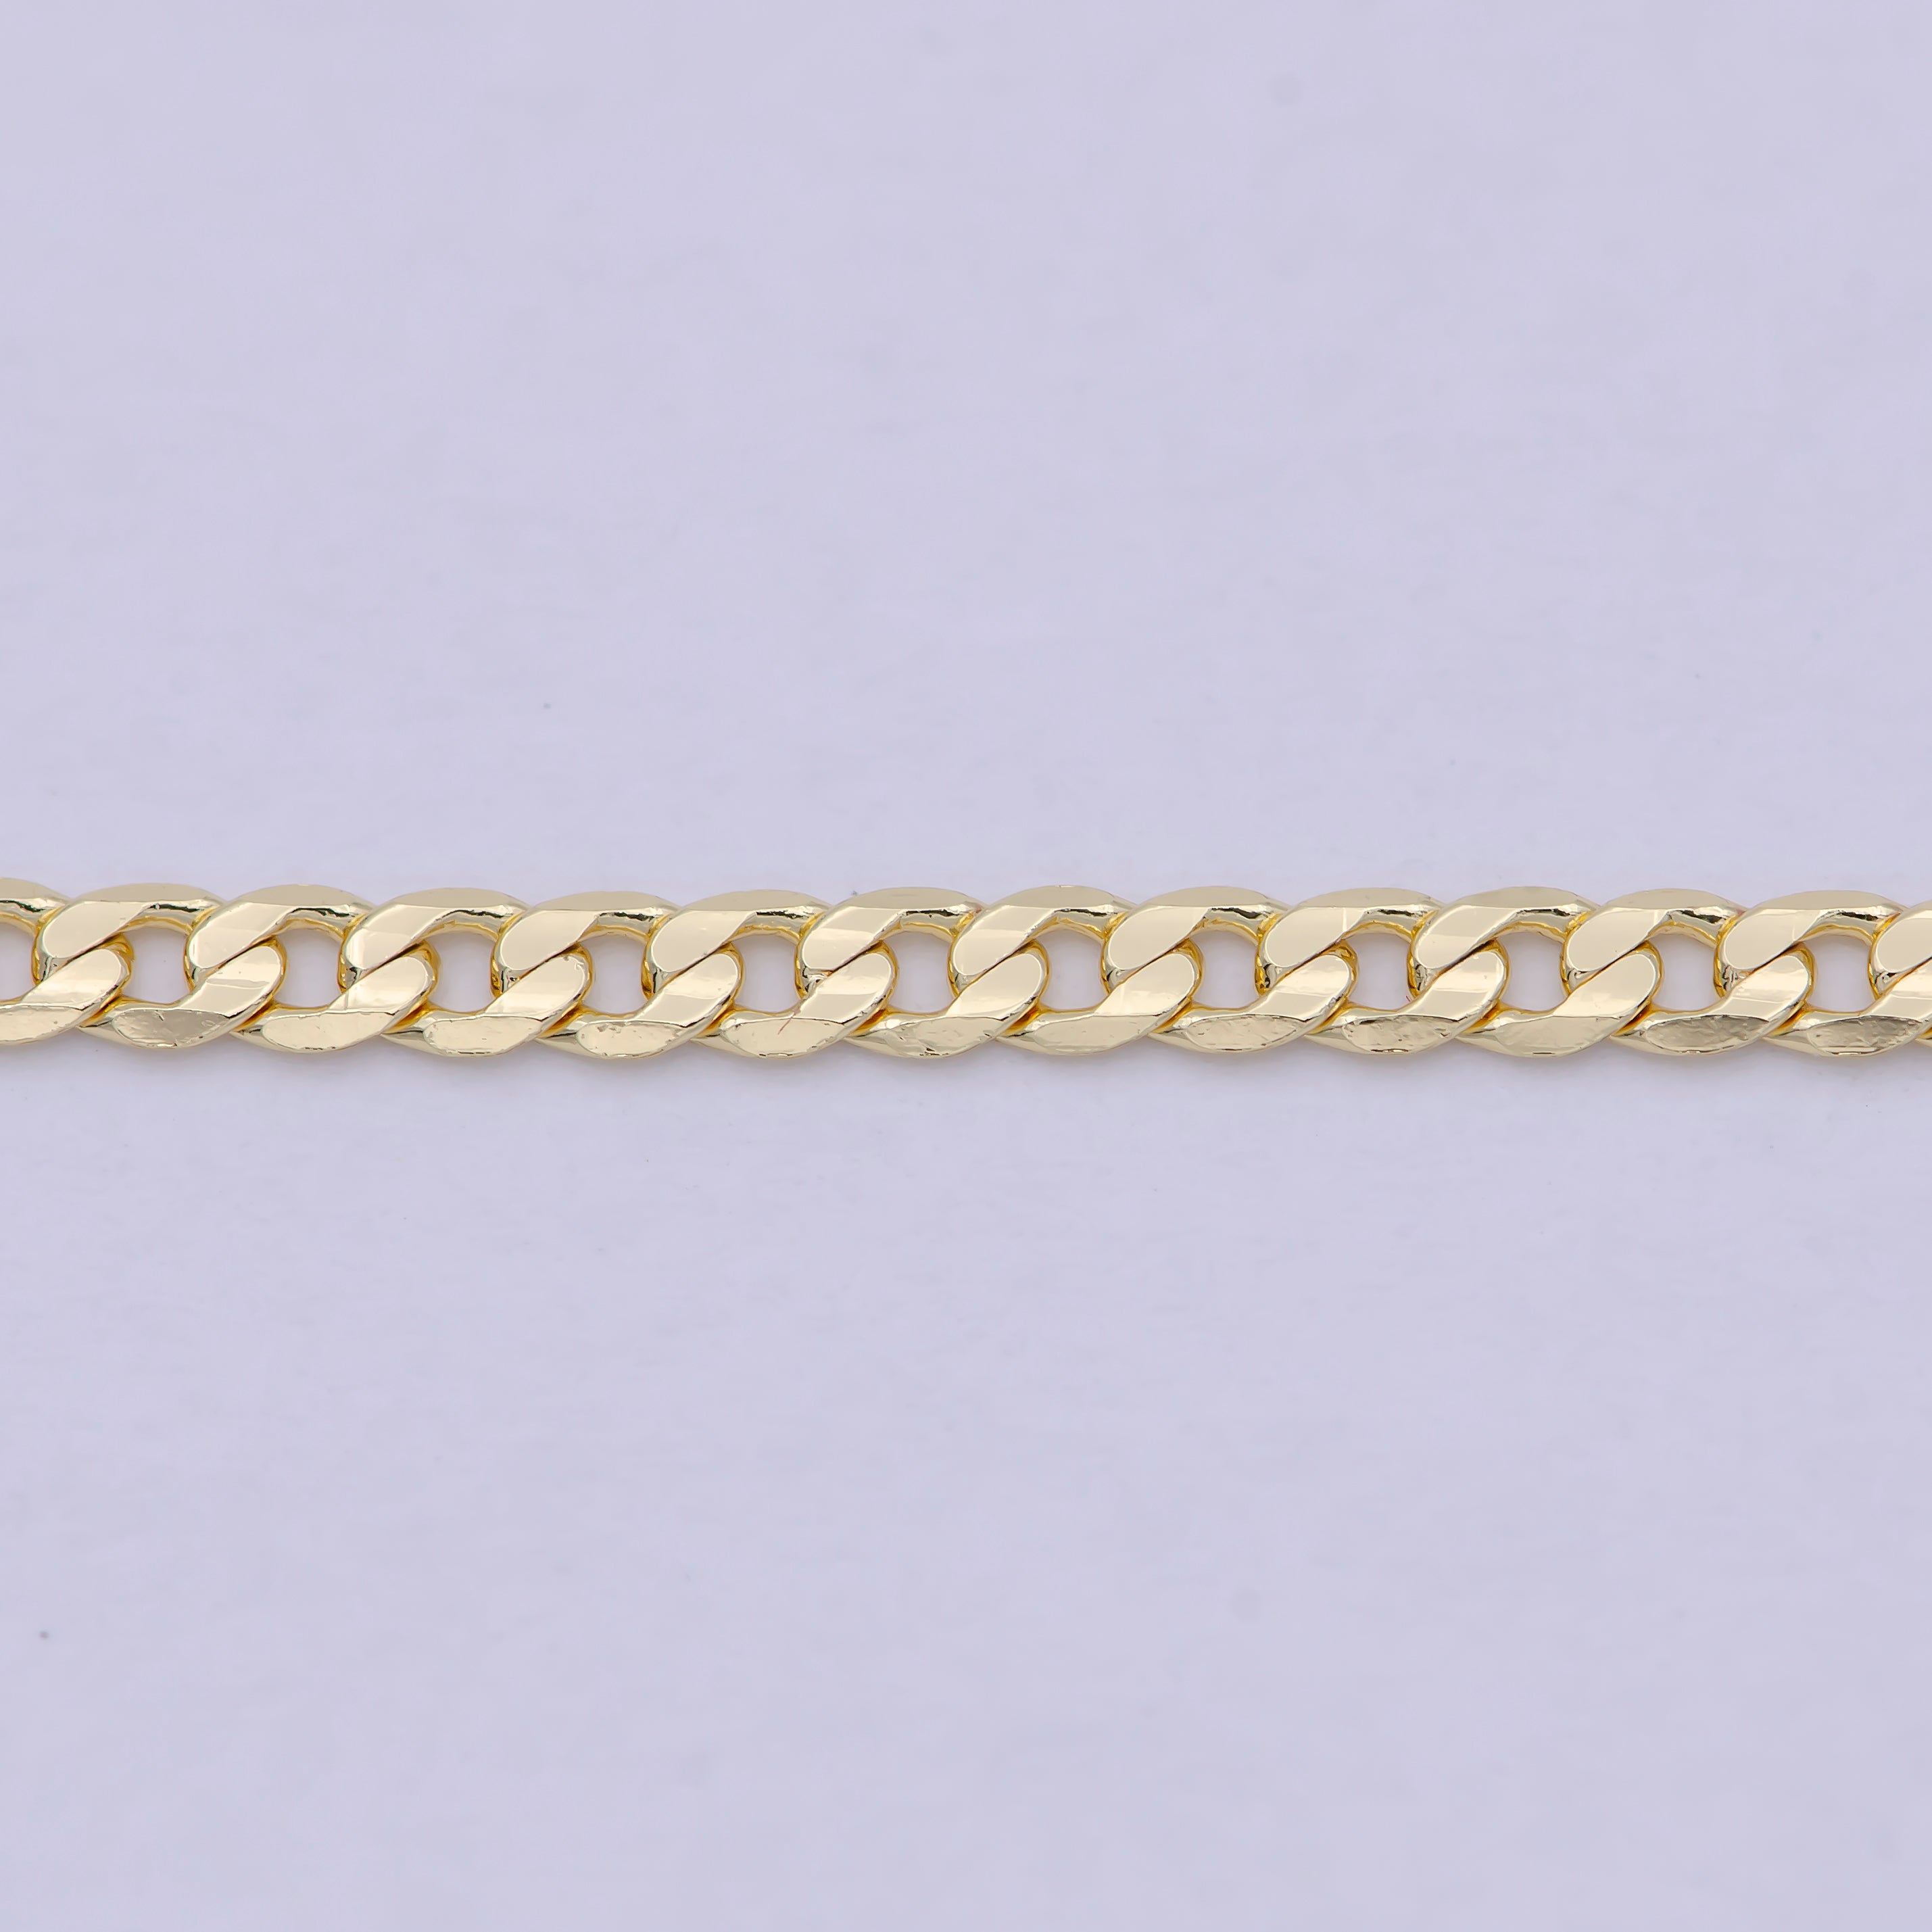 18K Gold Filled Curb Chain Necklace, 17.2 Inch Curb Chain Necklace, Dainty 2.2mm Link Necklace w/ Spring Clasp | WA-834 - DLUXCA